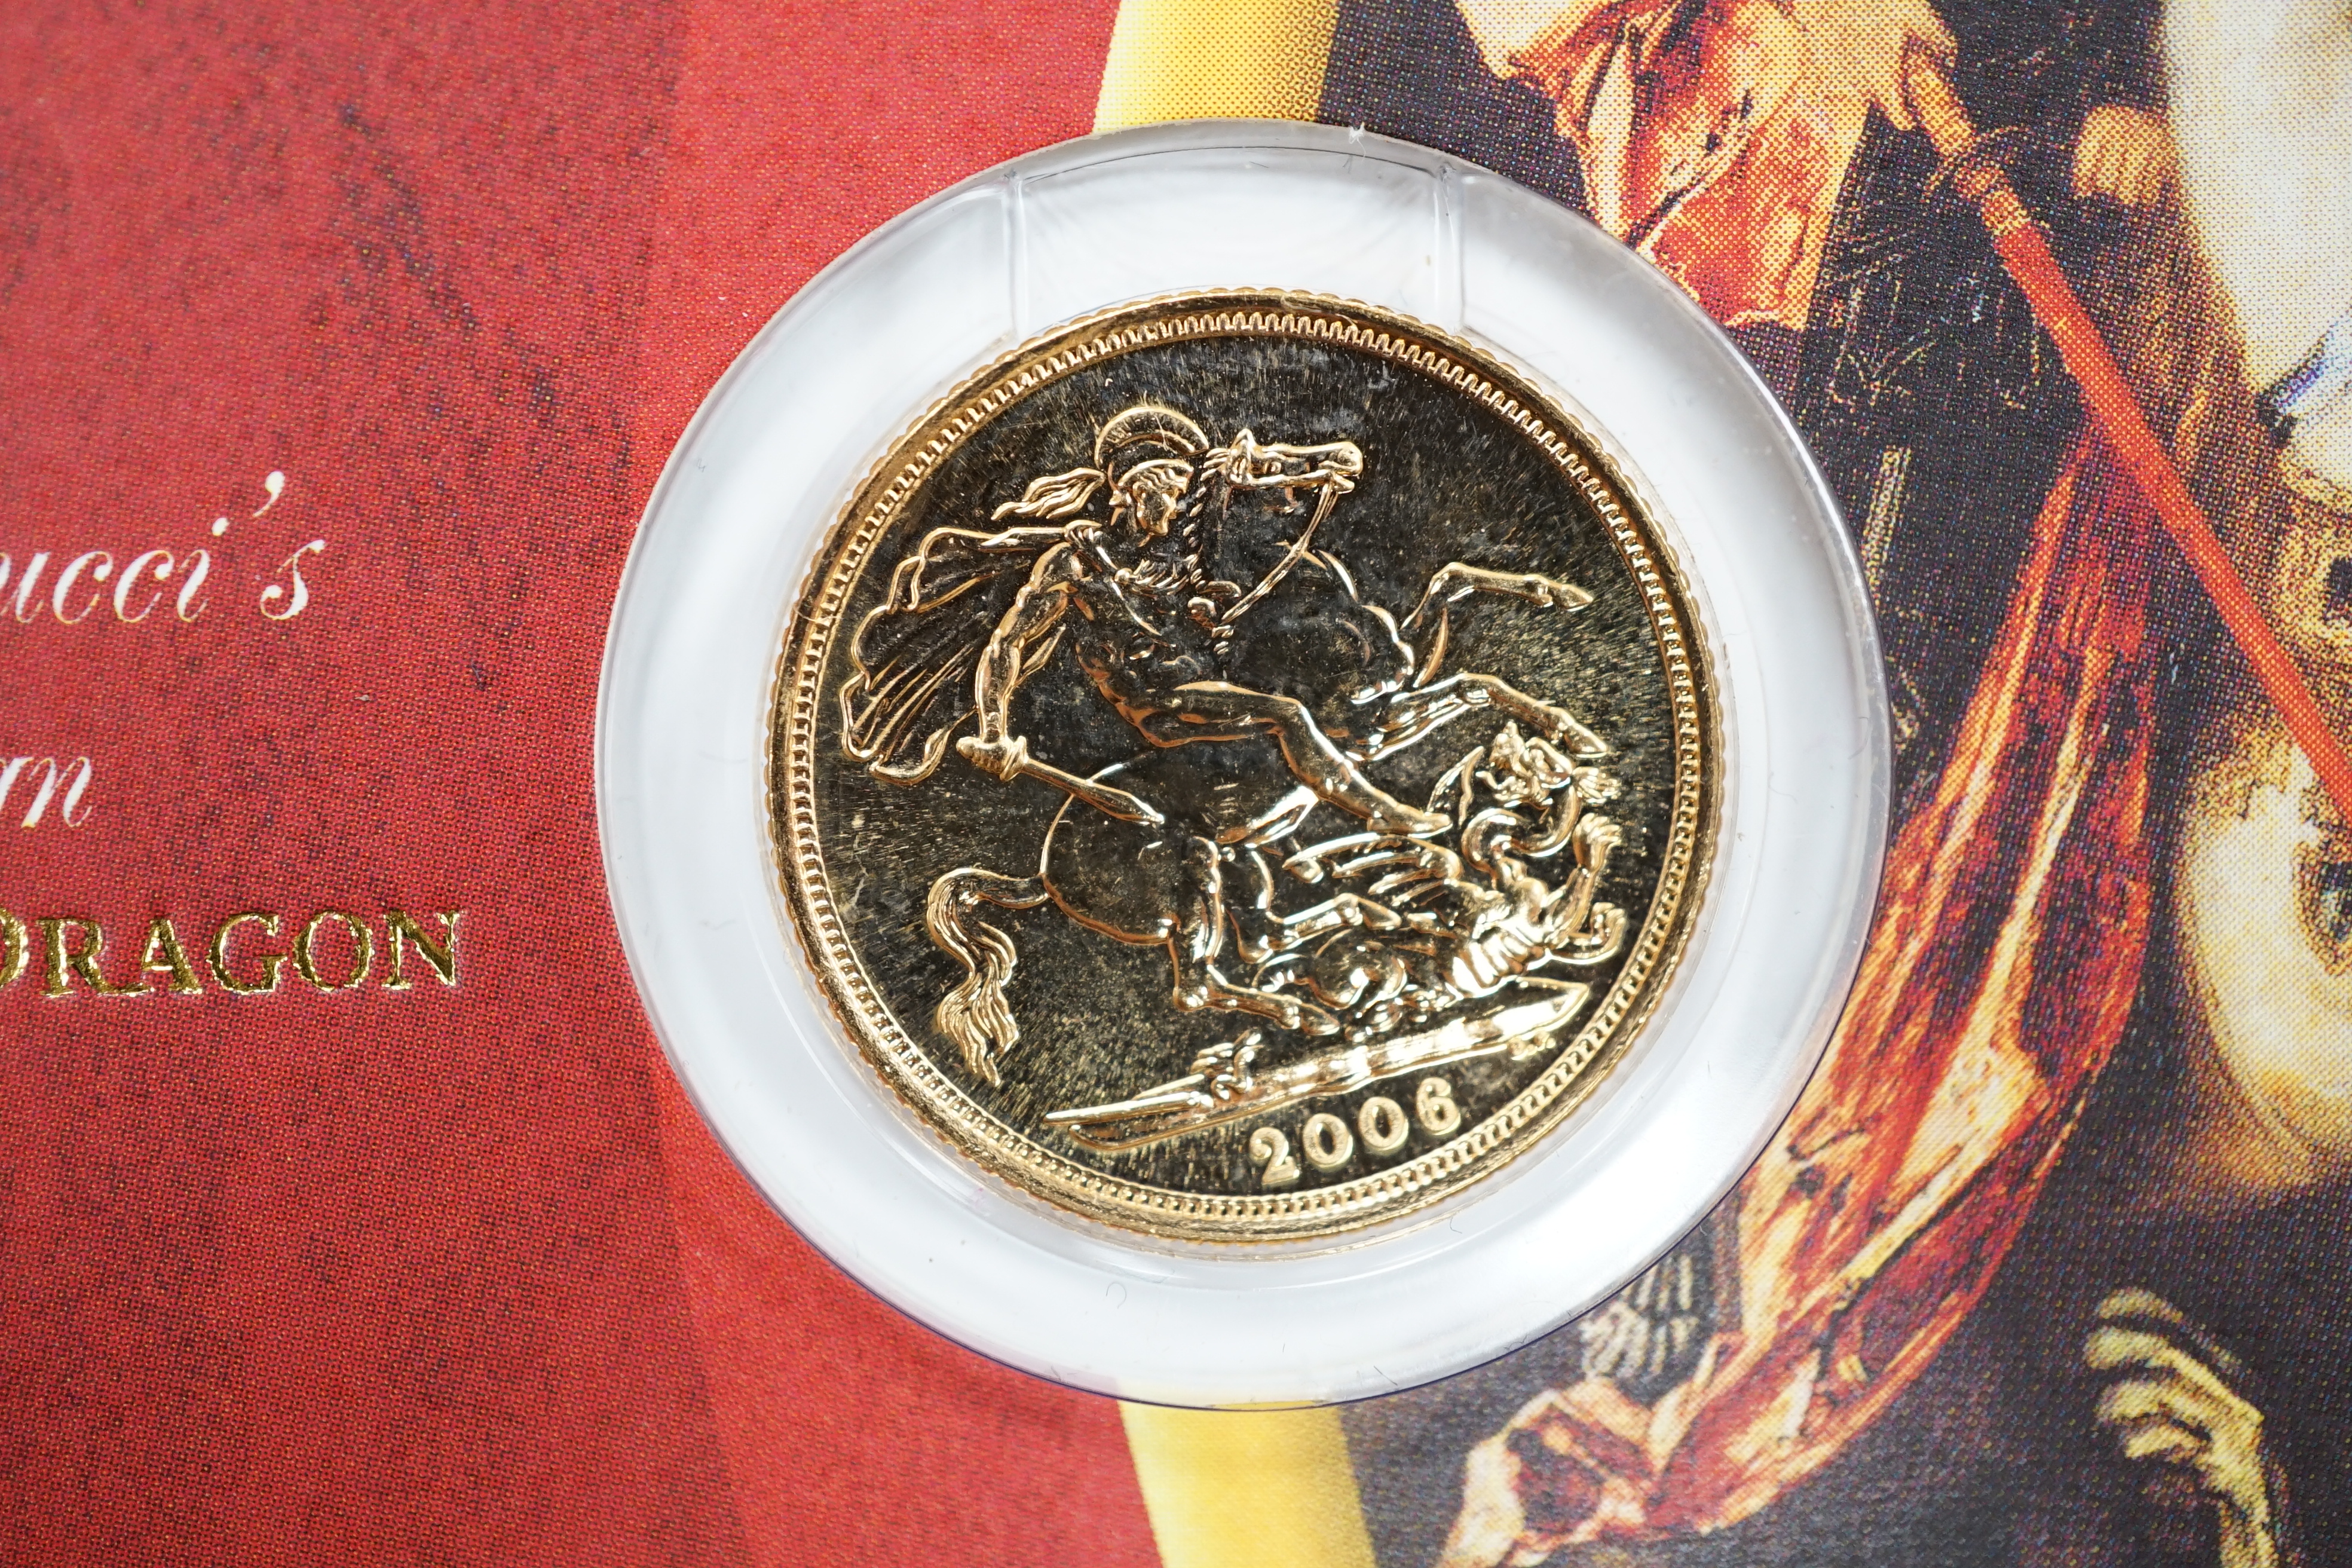 British gold coins, Elizabeth II, 2006 gold bullion sovereign St. George & The Dragon, BUNC, with Royal Mint card